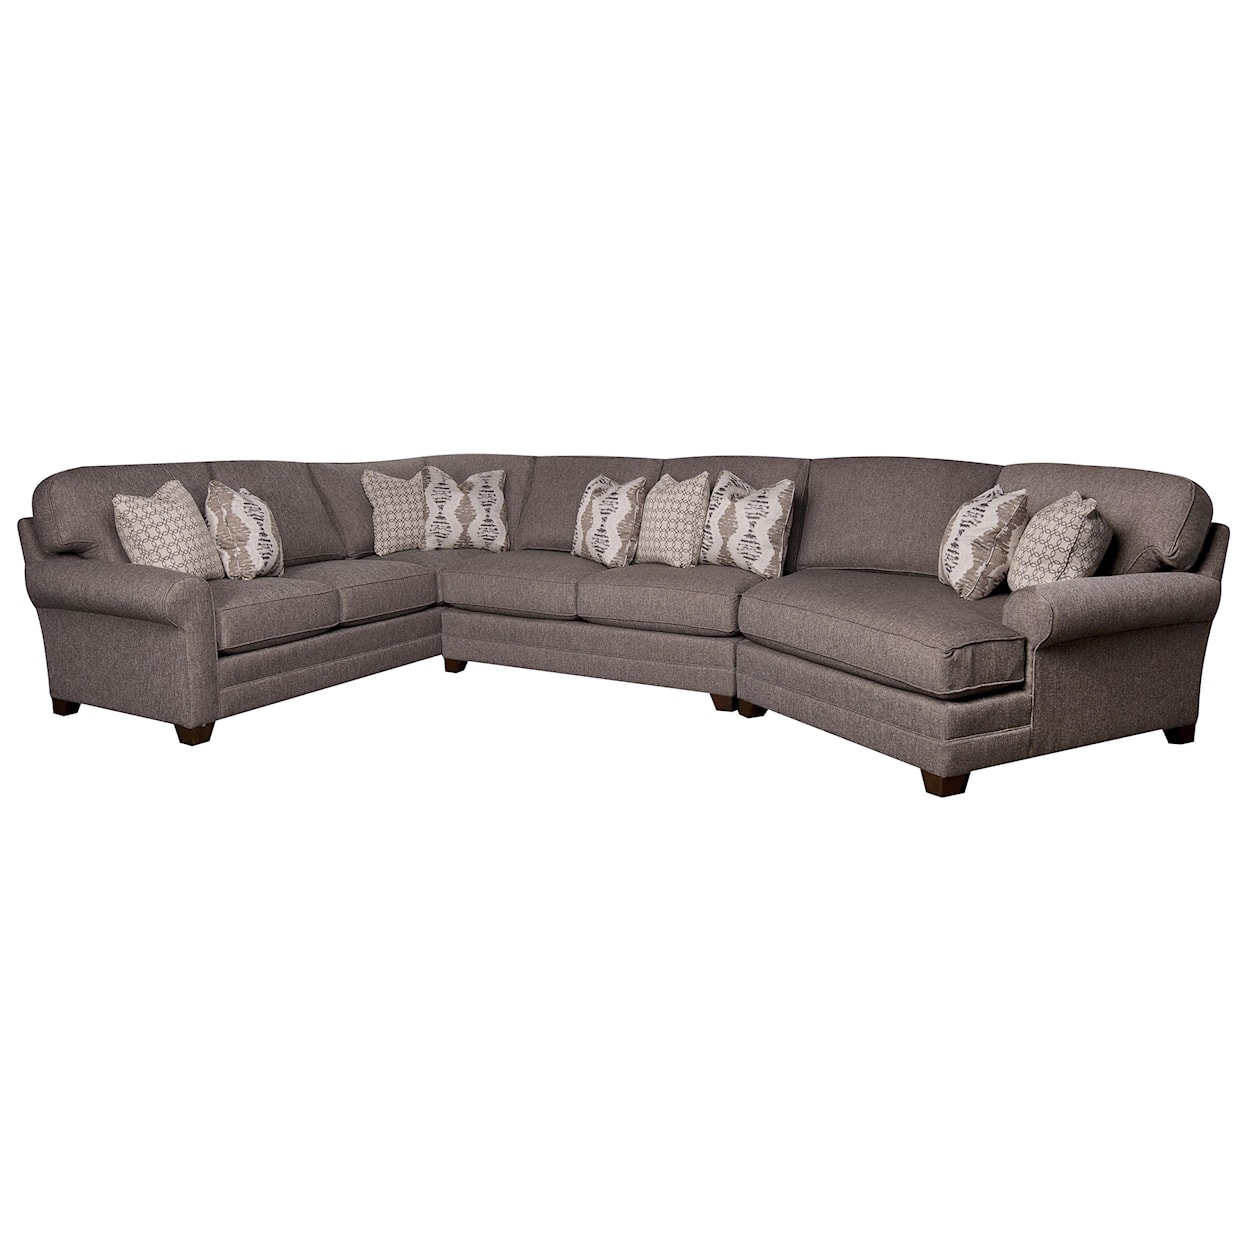 King Hickory Mcgraw McGraw Sectional Sofa